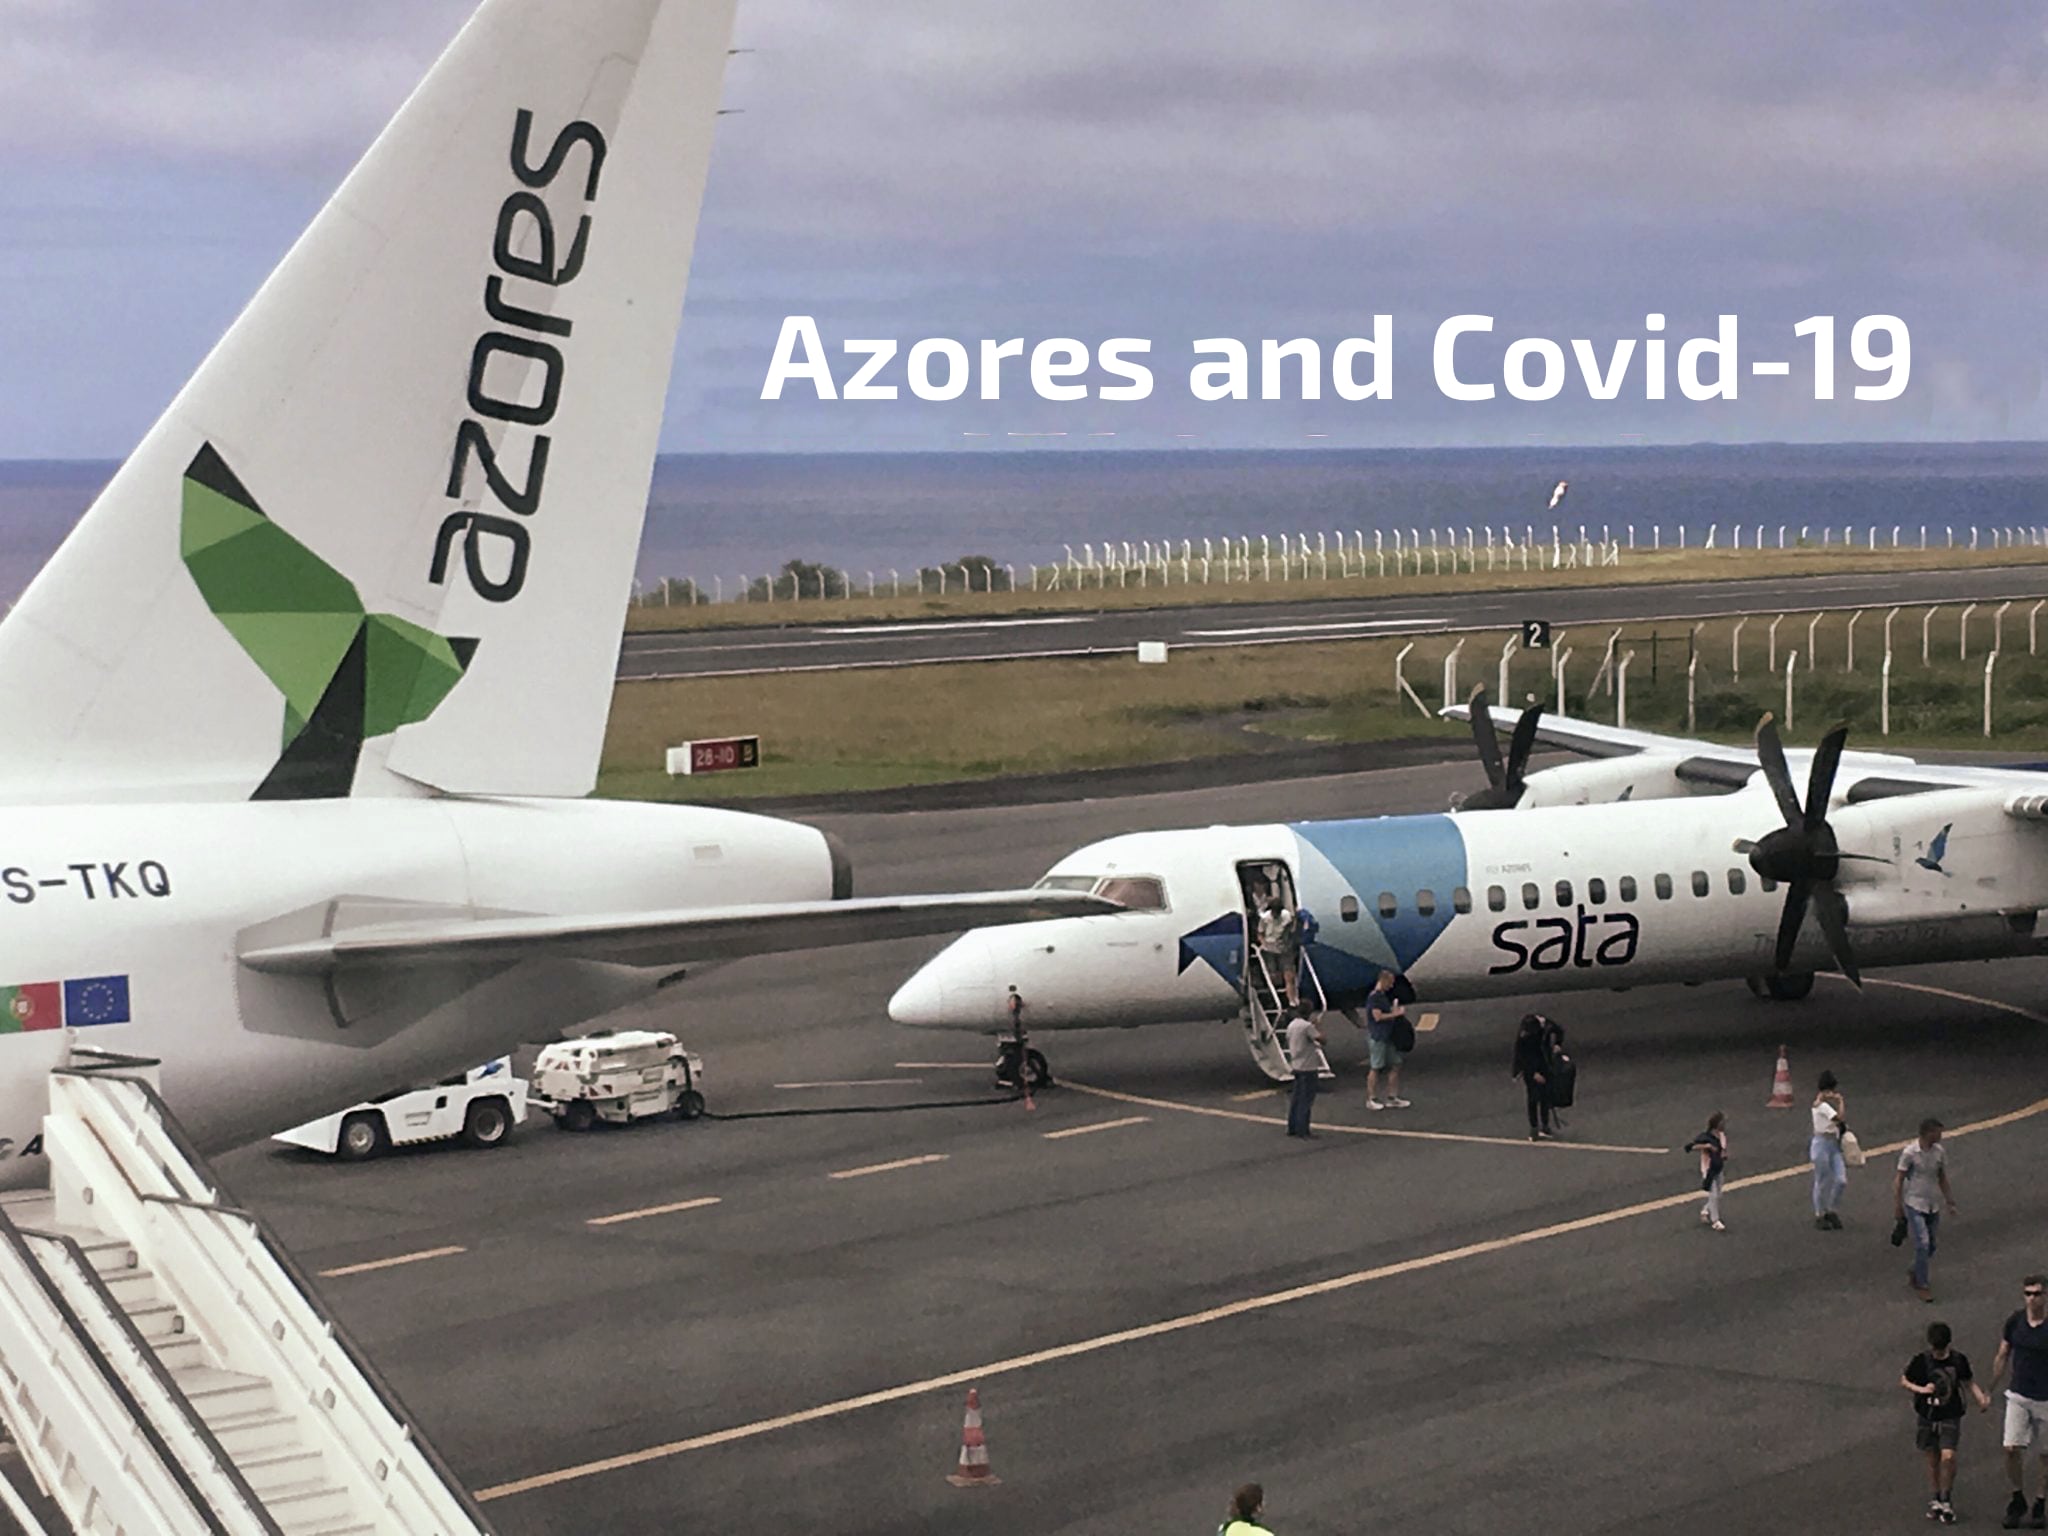 Azores and Covid 19